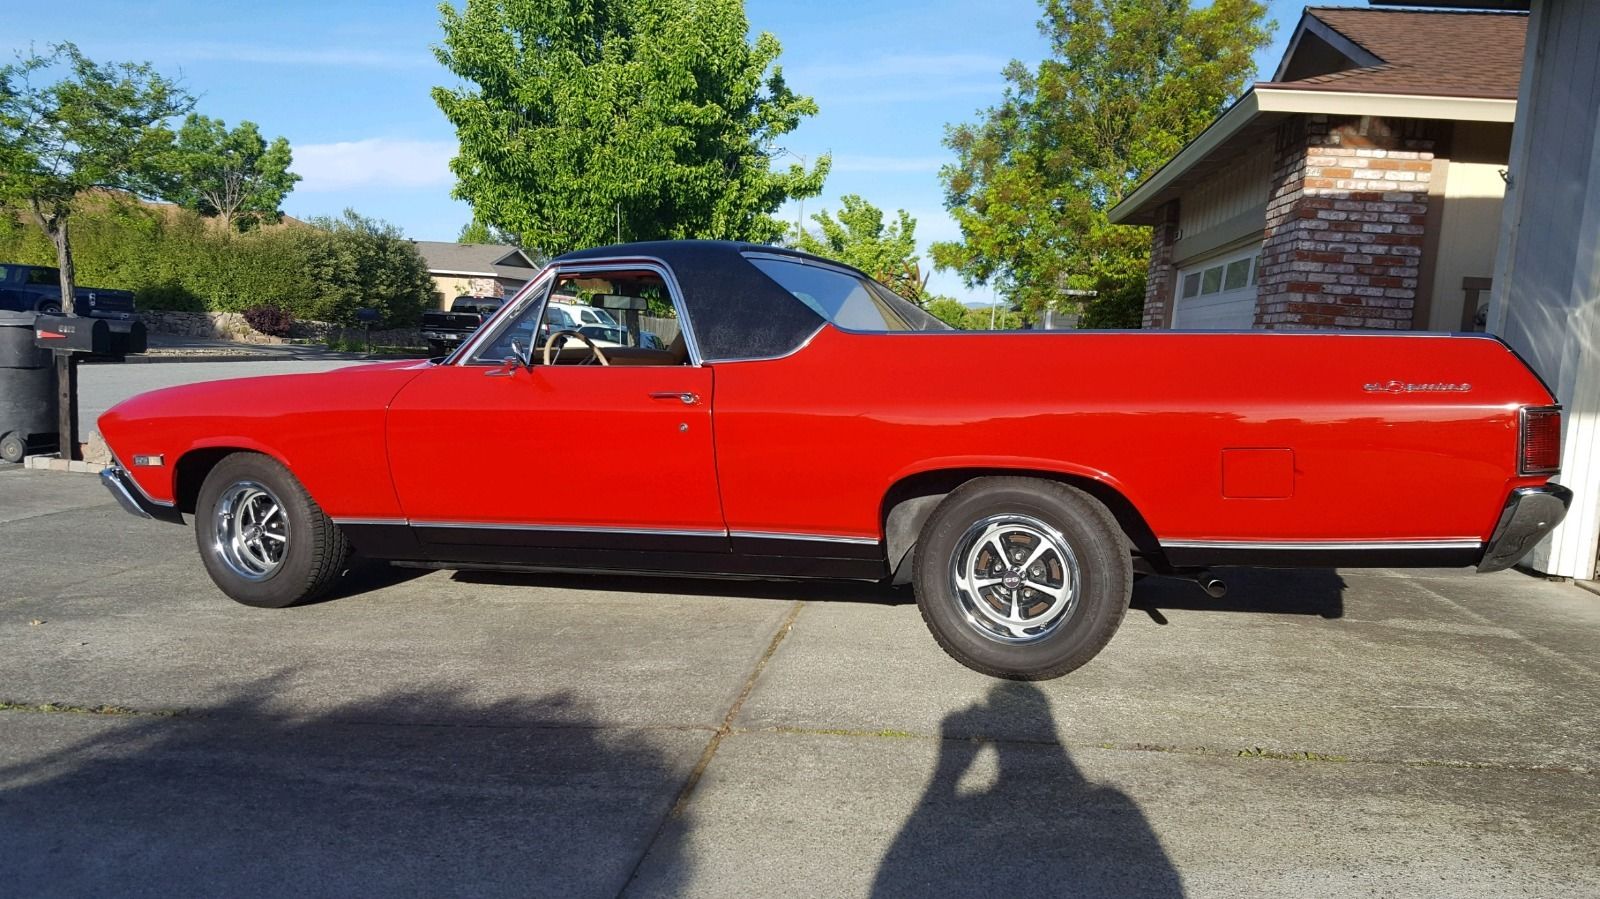 1968 el camino tailgate weight limit